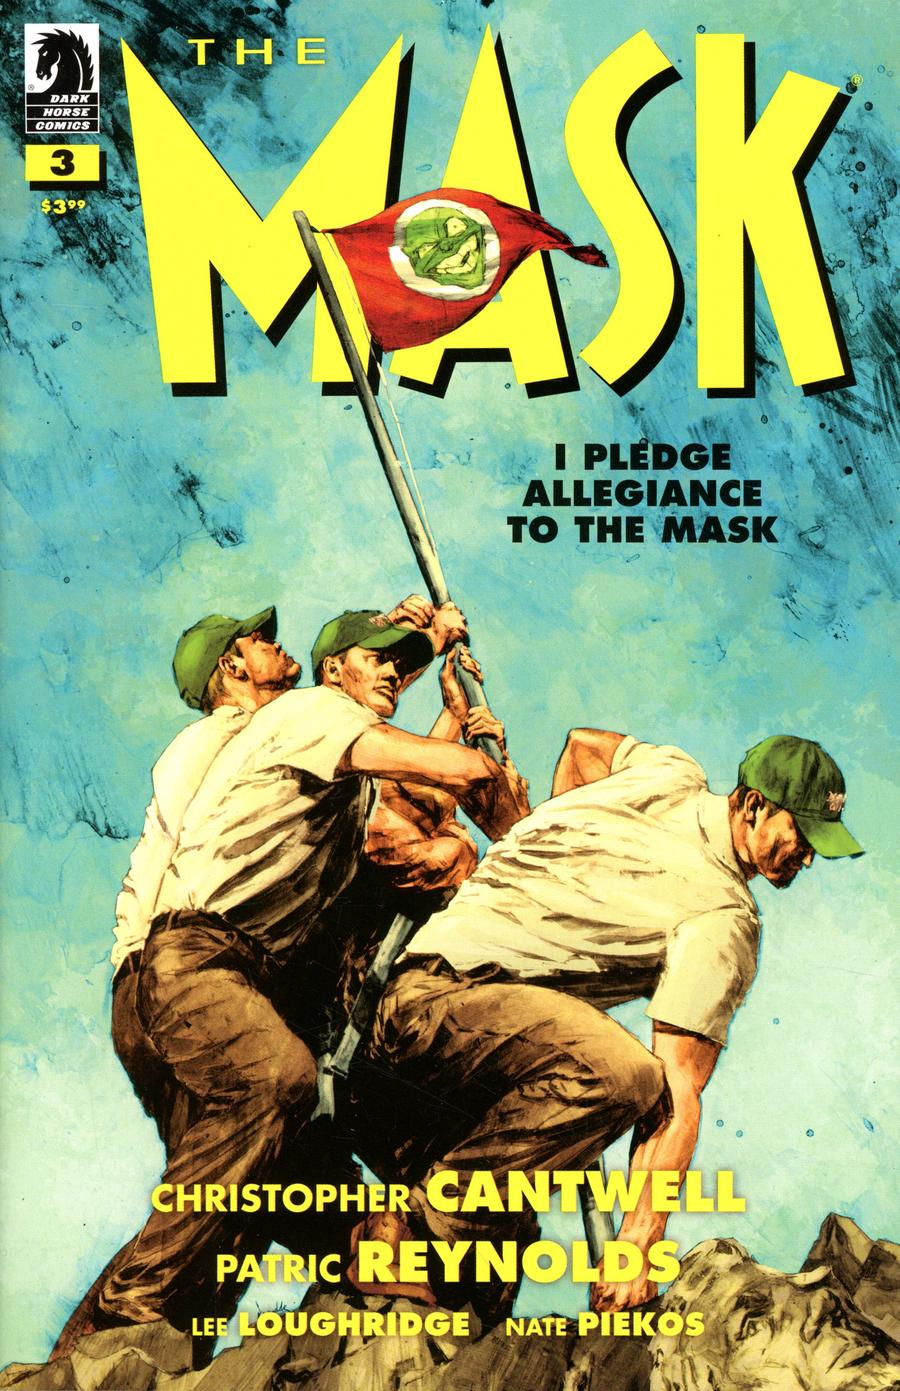 The Mask: I Pledge Allegiance To The Mask #3 (2019)